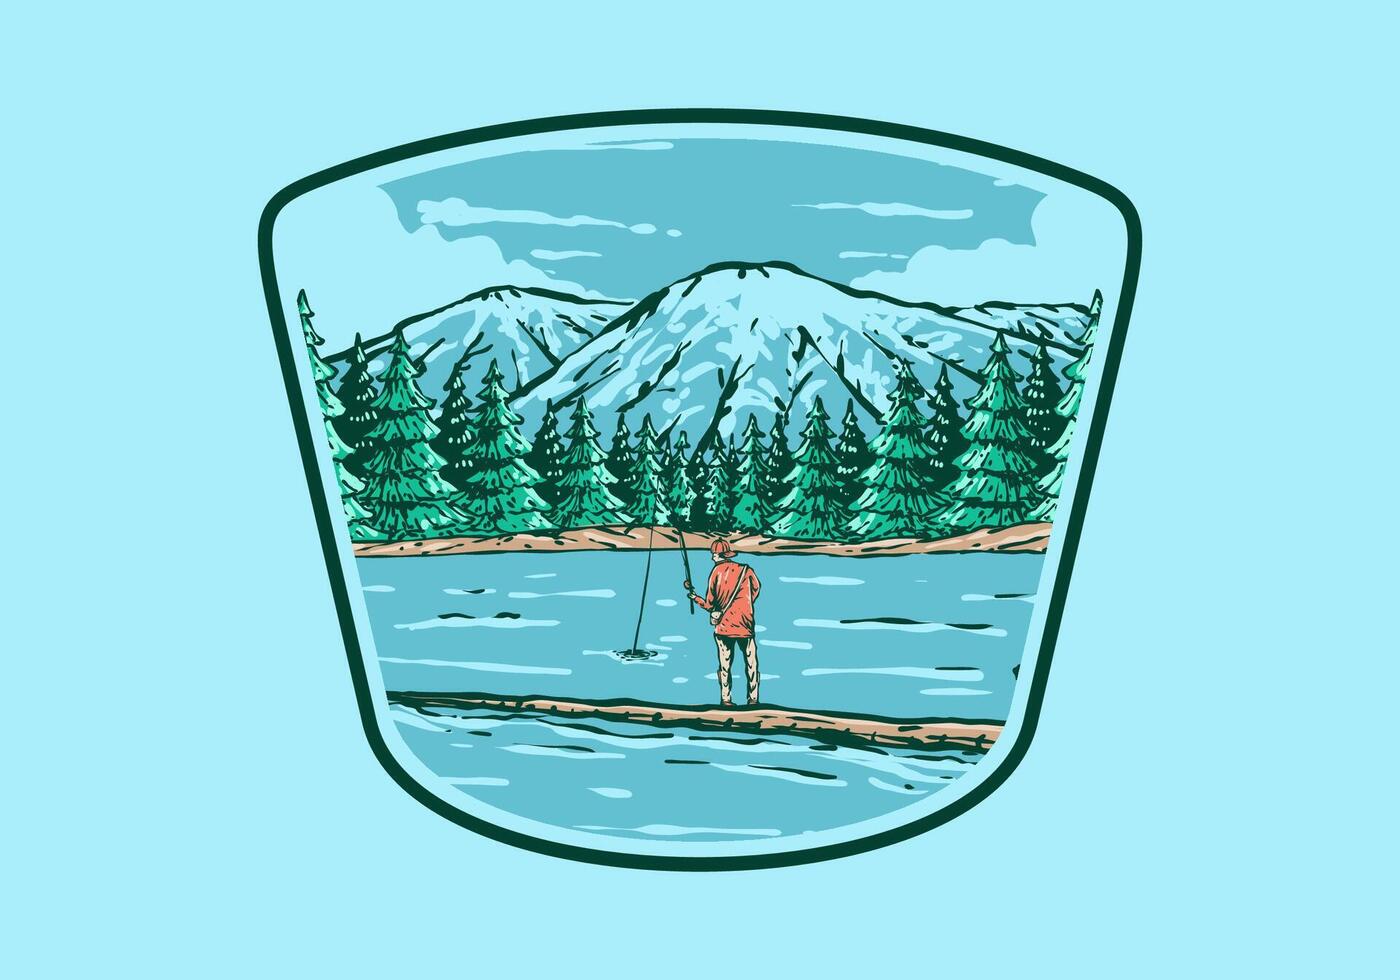 Vintage illustration of a man fishing on the lake with forest and mountain view vector